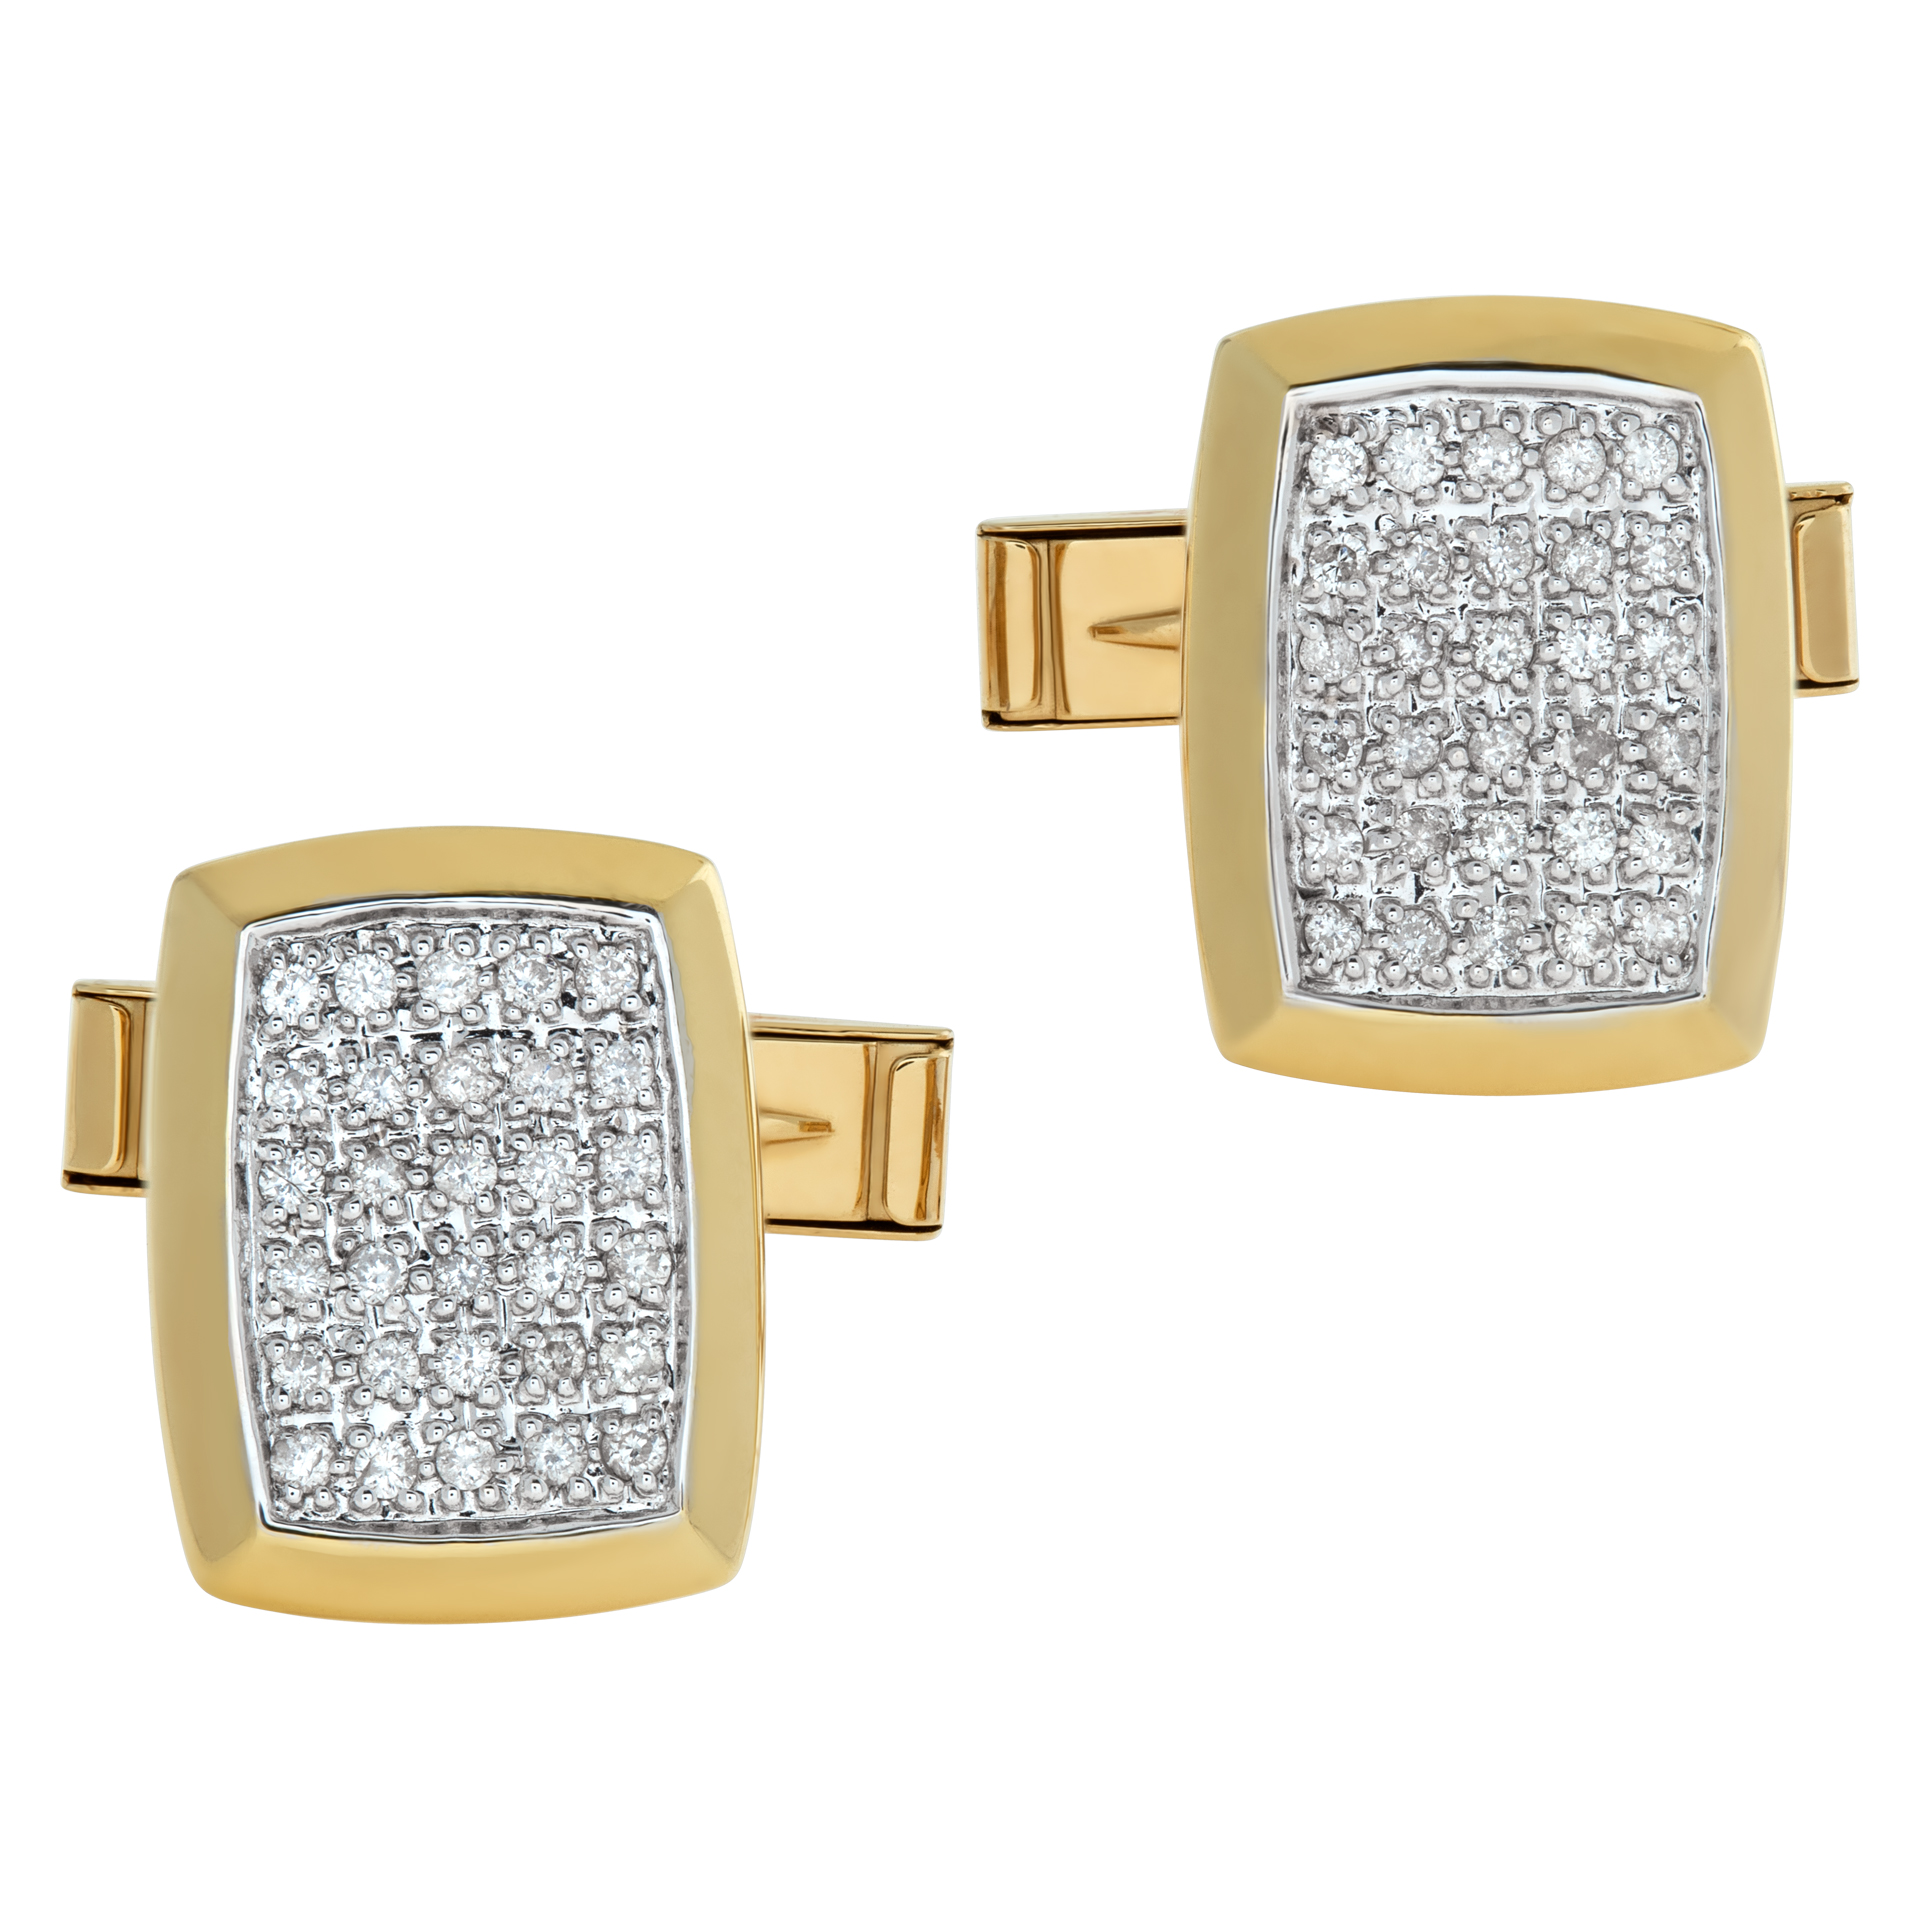 Cuff Links In 14k Yellow Gold With Diamonds (Stones)